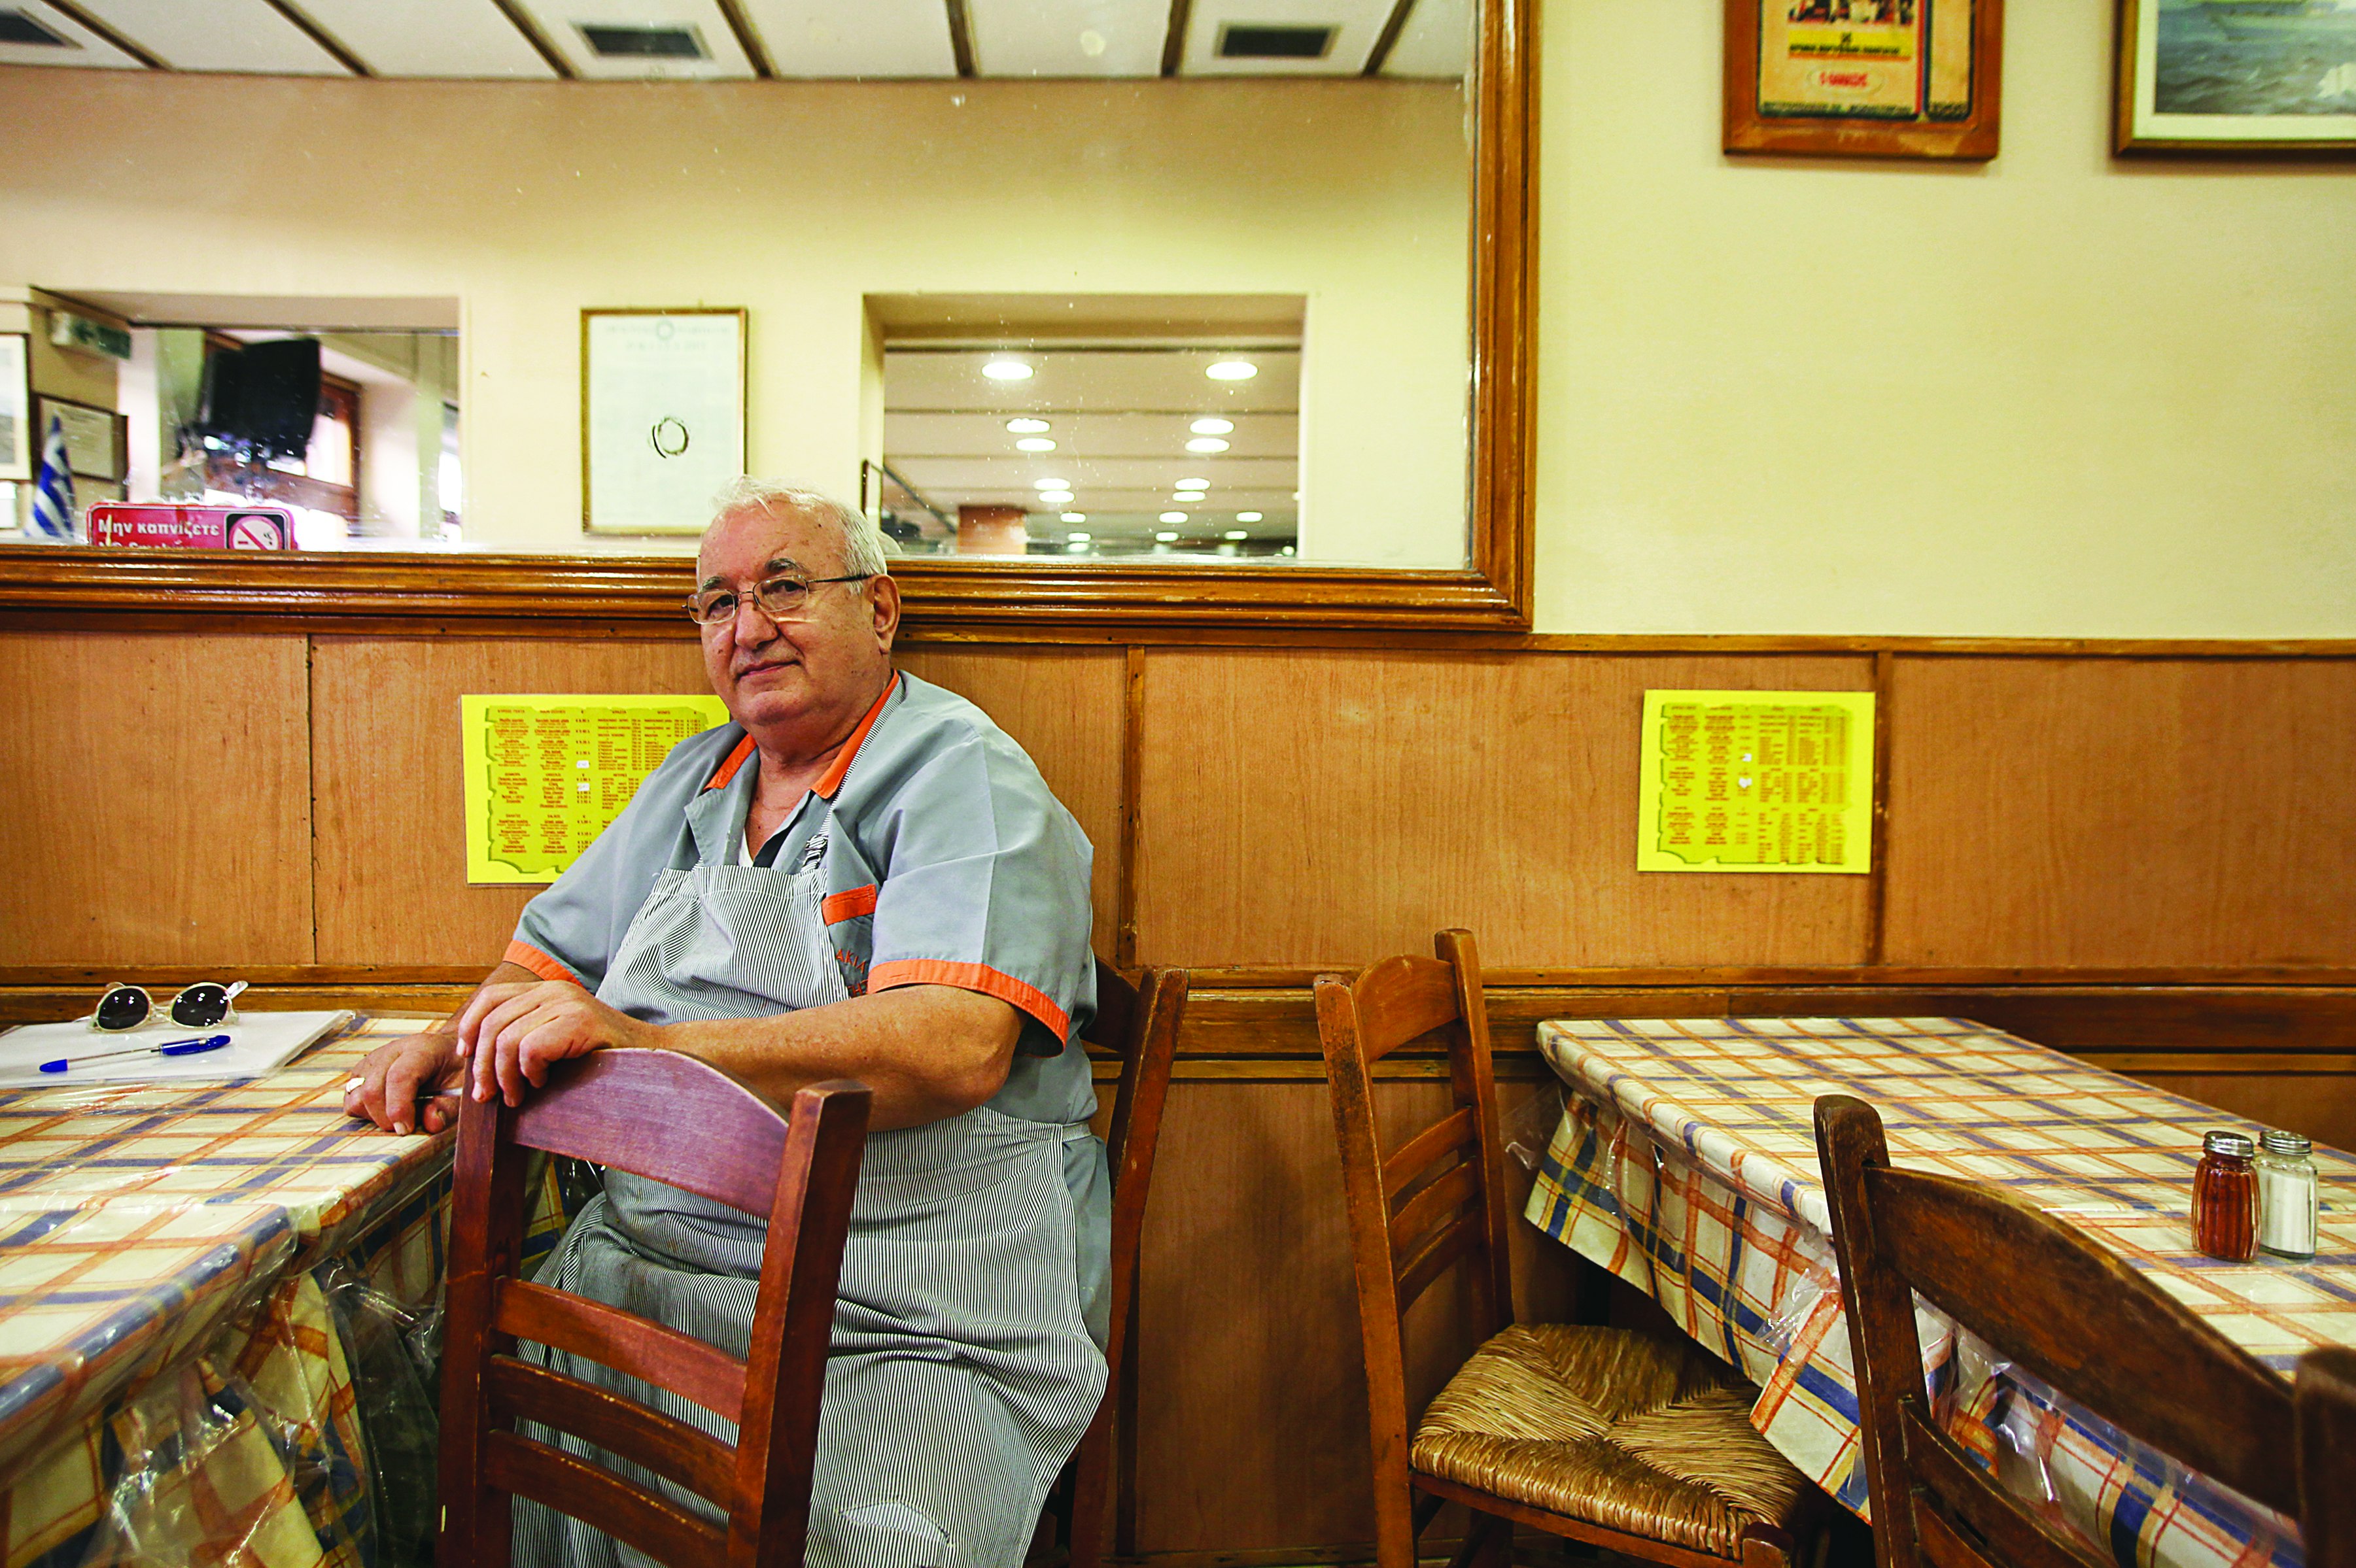 The owner of Thanasis restaurant sits at one of the tables, whcih are covered in blue and orange plaid clothes covered in clear plastic. He is wearing a light blue chefs shirt with orange trim on the sleeves and collar. The walls are paneled in wood and veneer, belaying the age of the restaurant